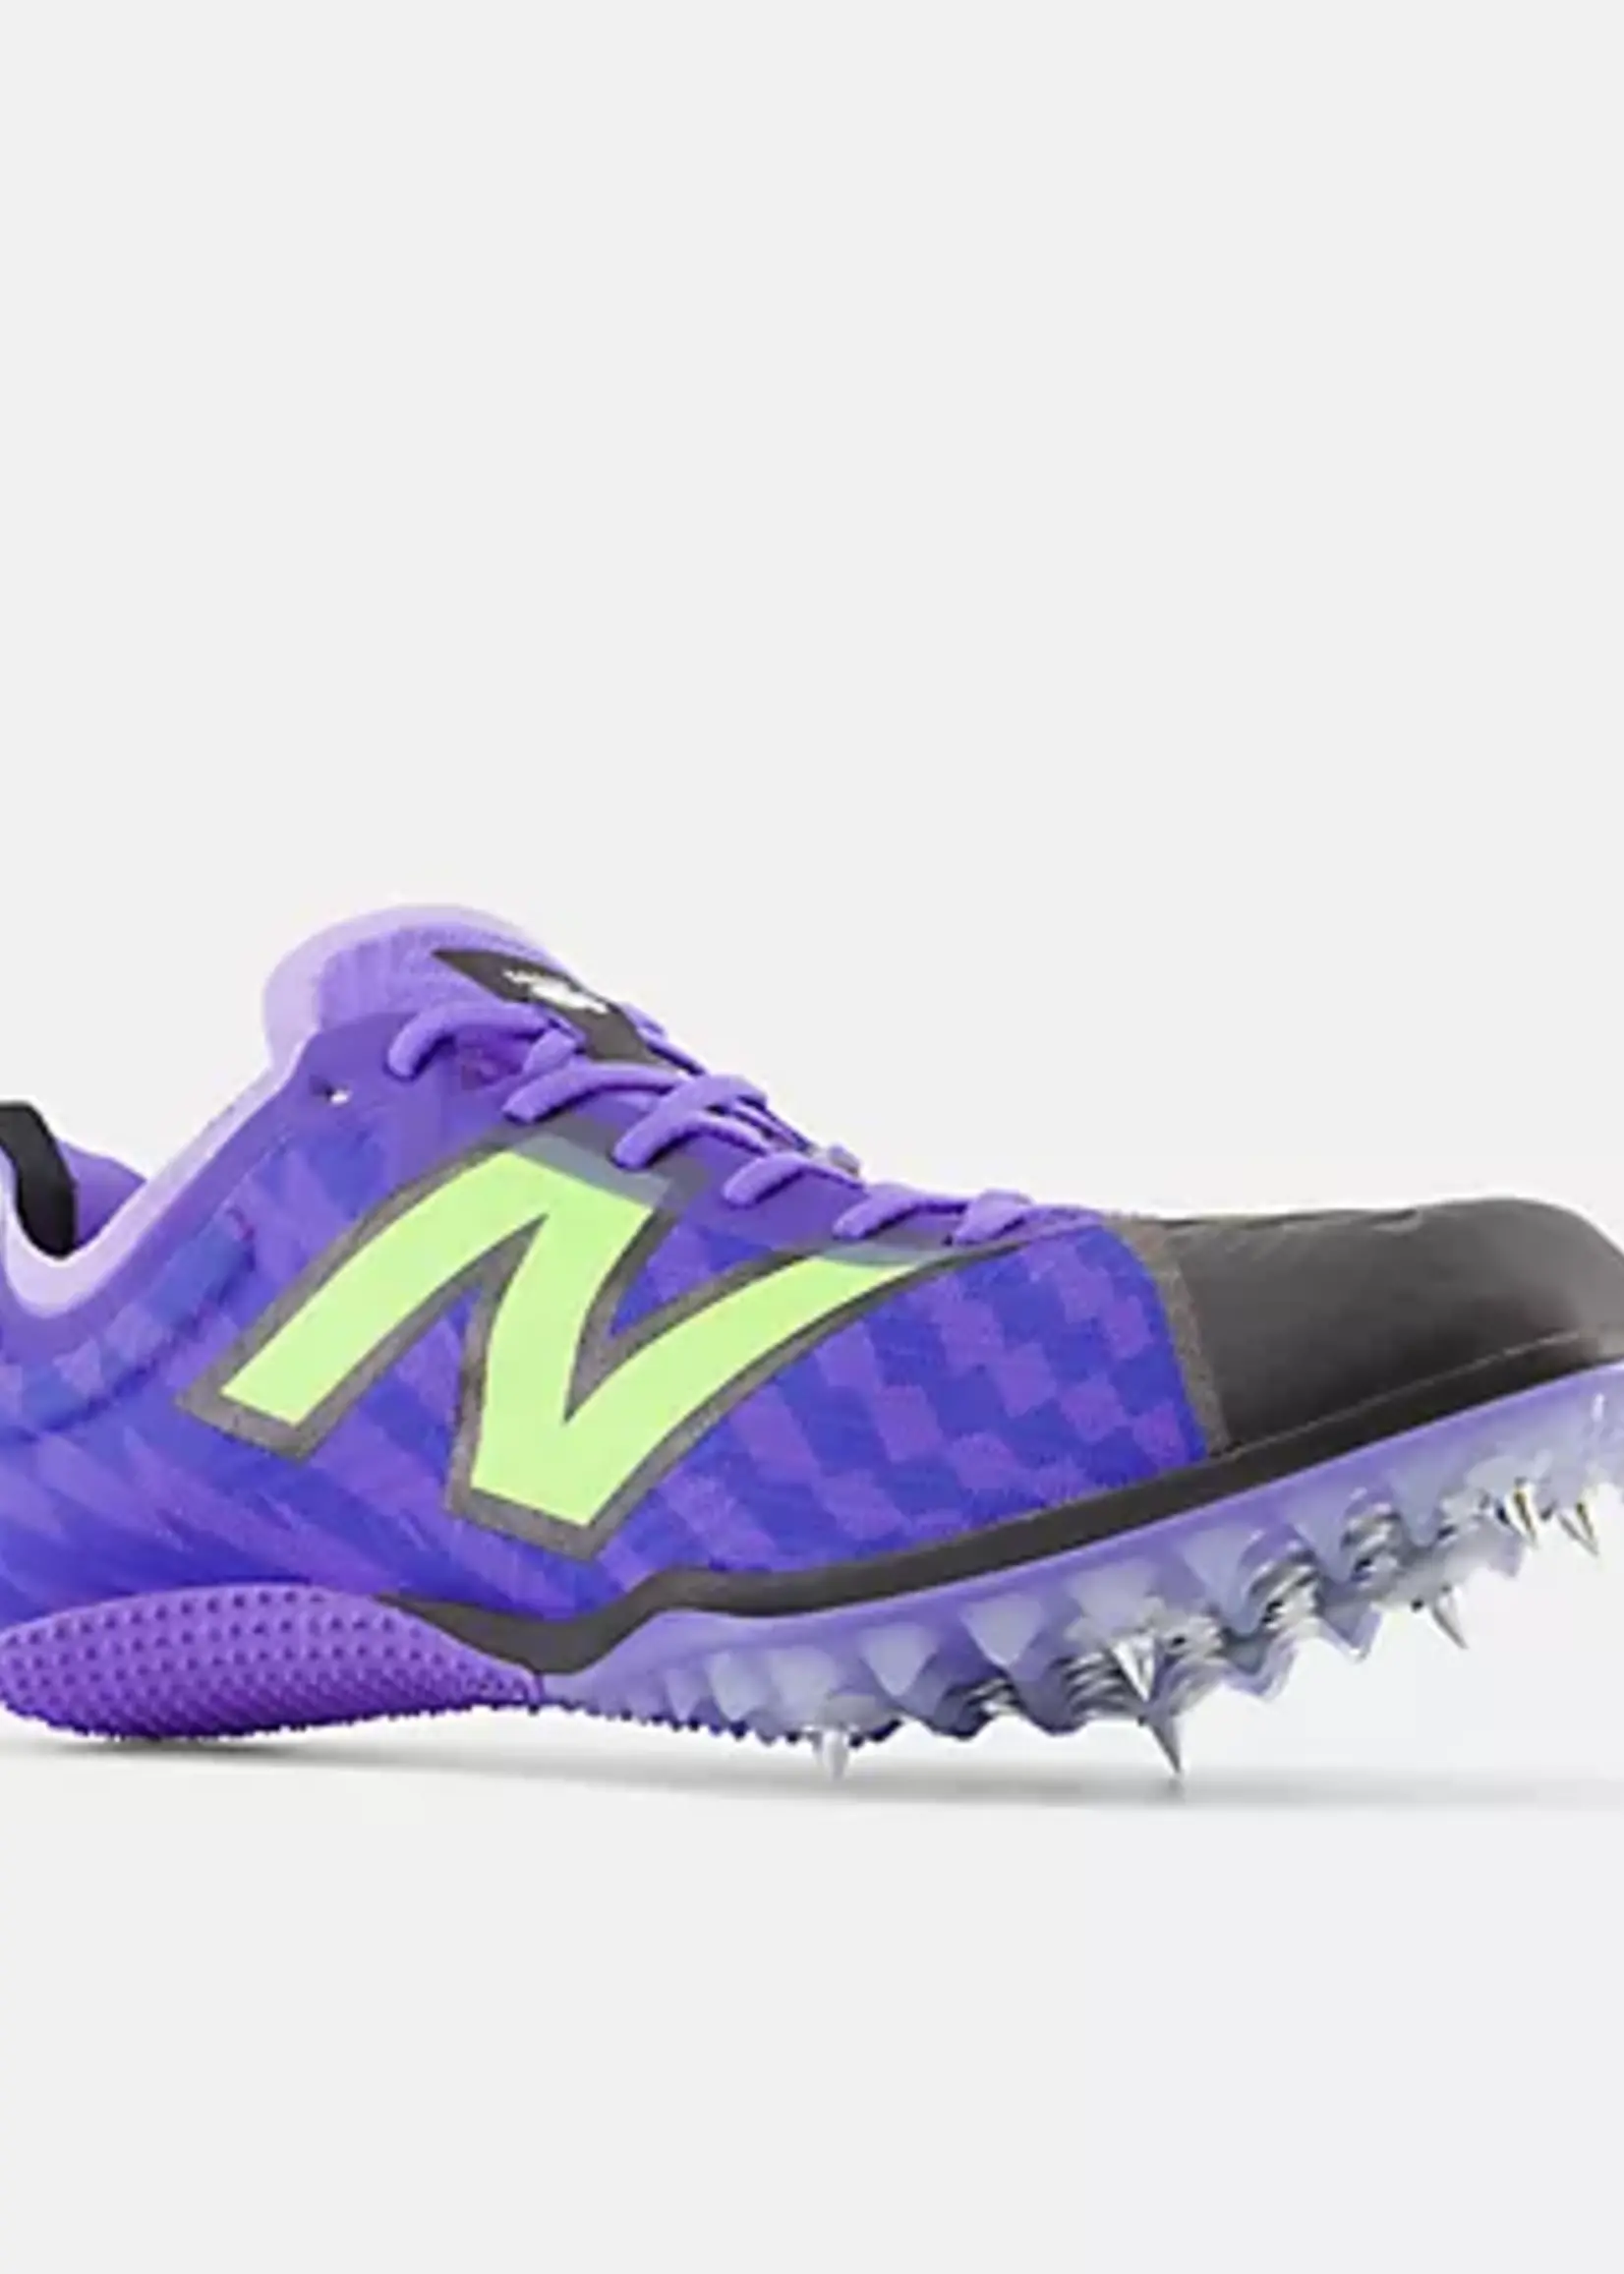 NEW BALANCE WOMEN'S FUELCELL SD100 V5